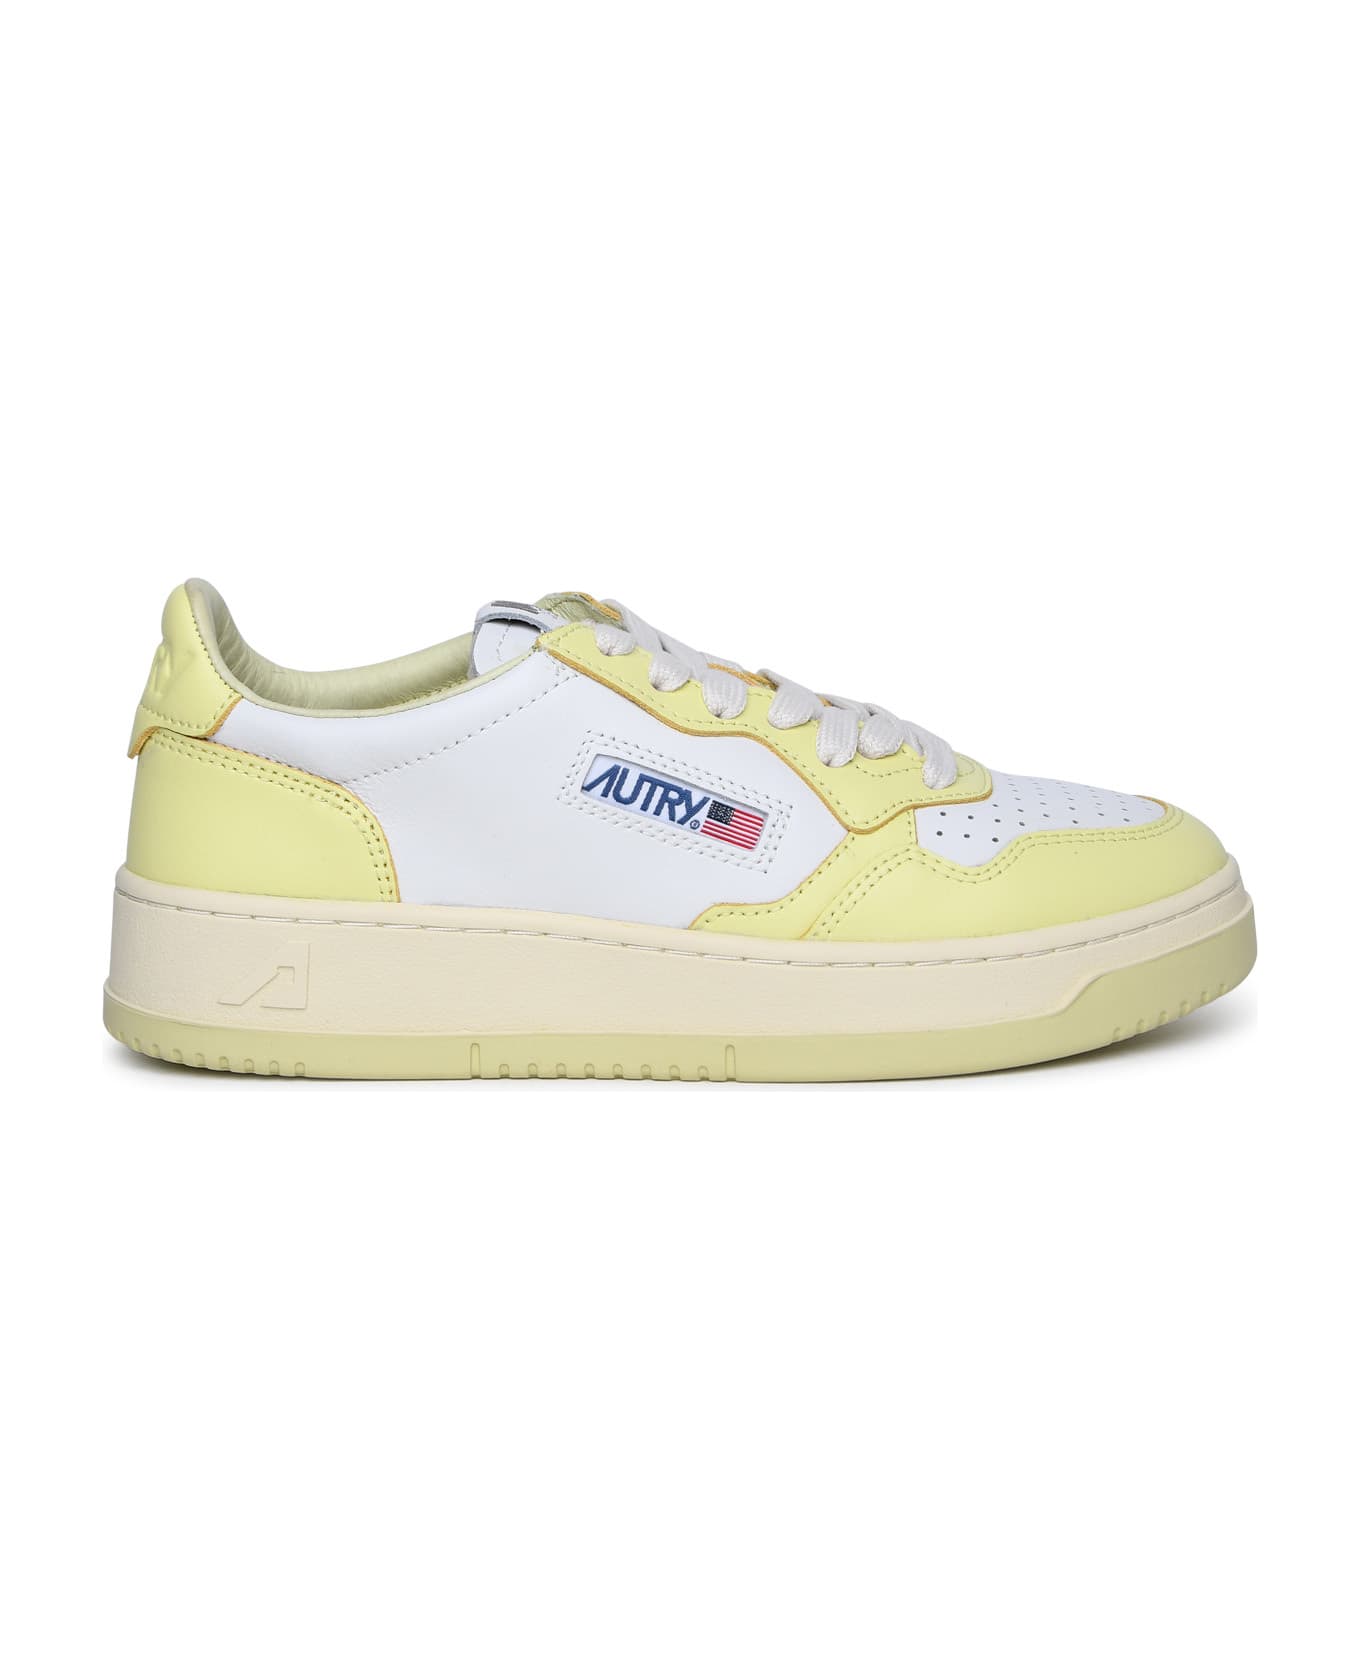 Autry 'medalist' Yellow Leather Sneakers - Wht/lime Yl